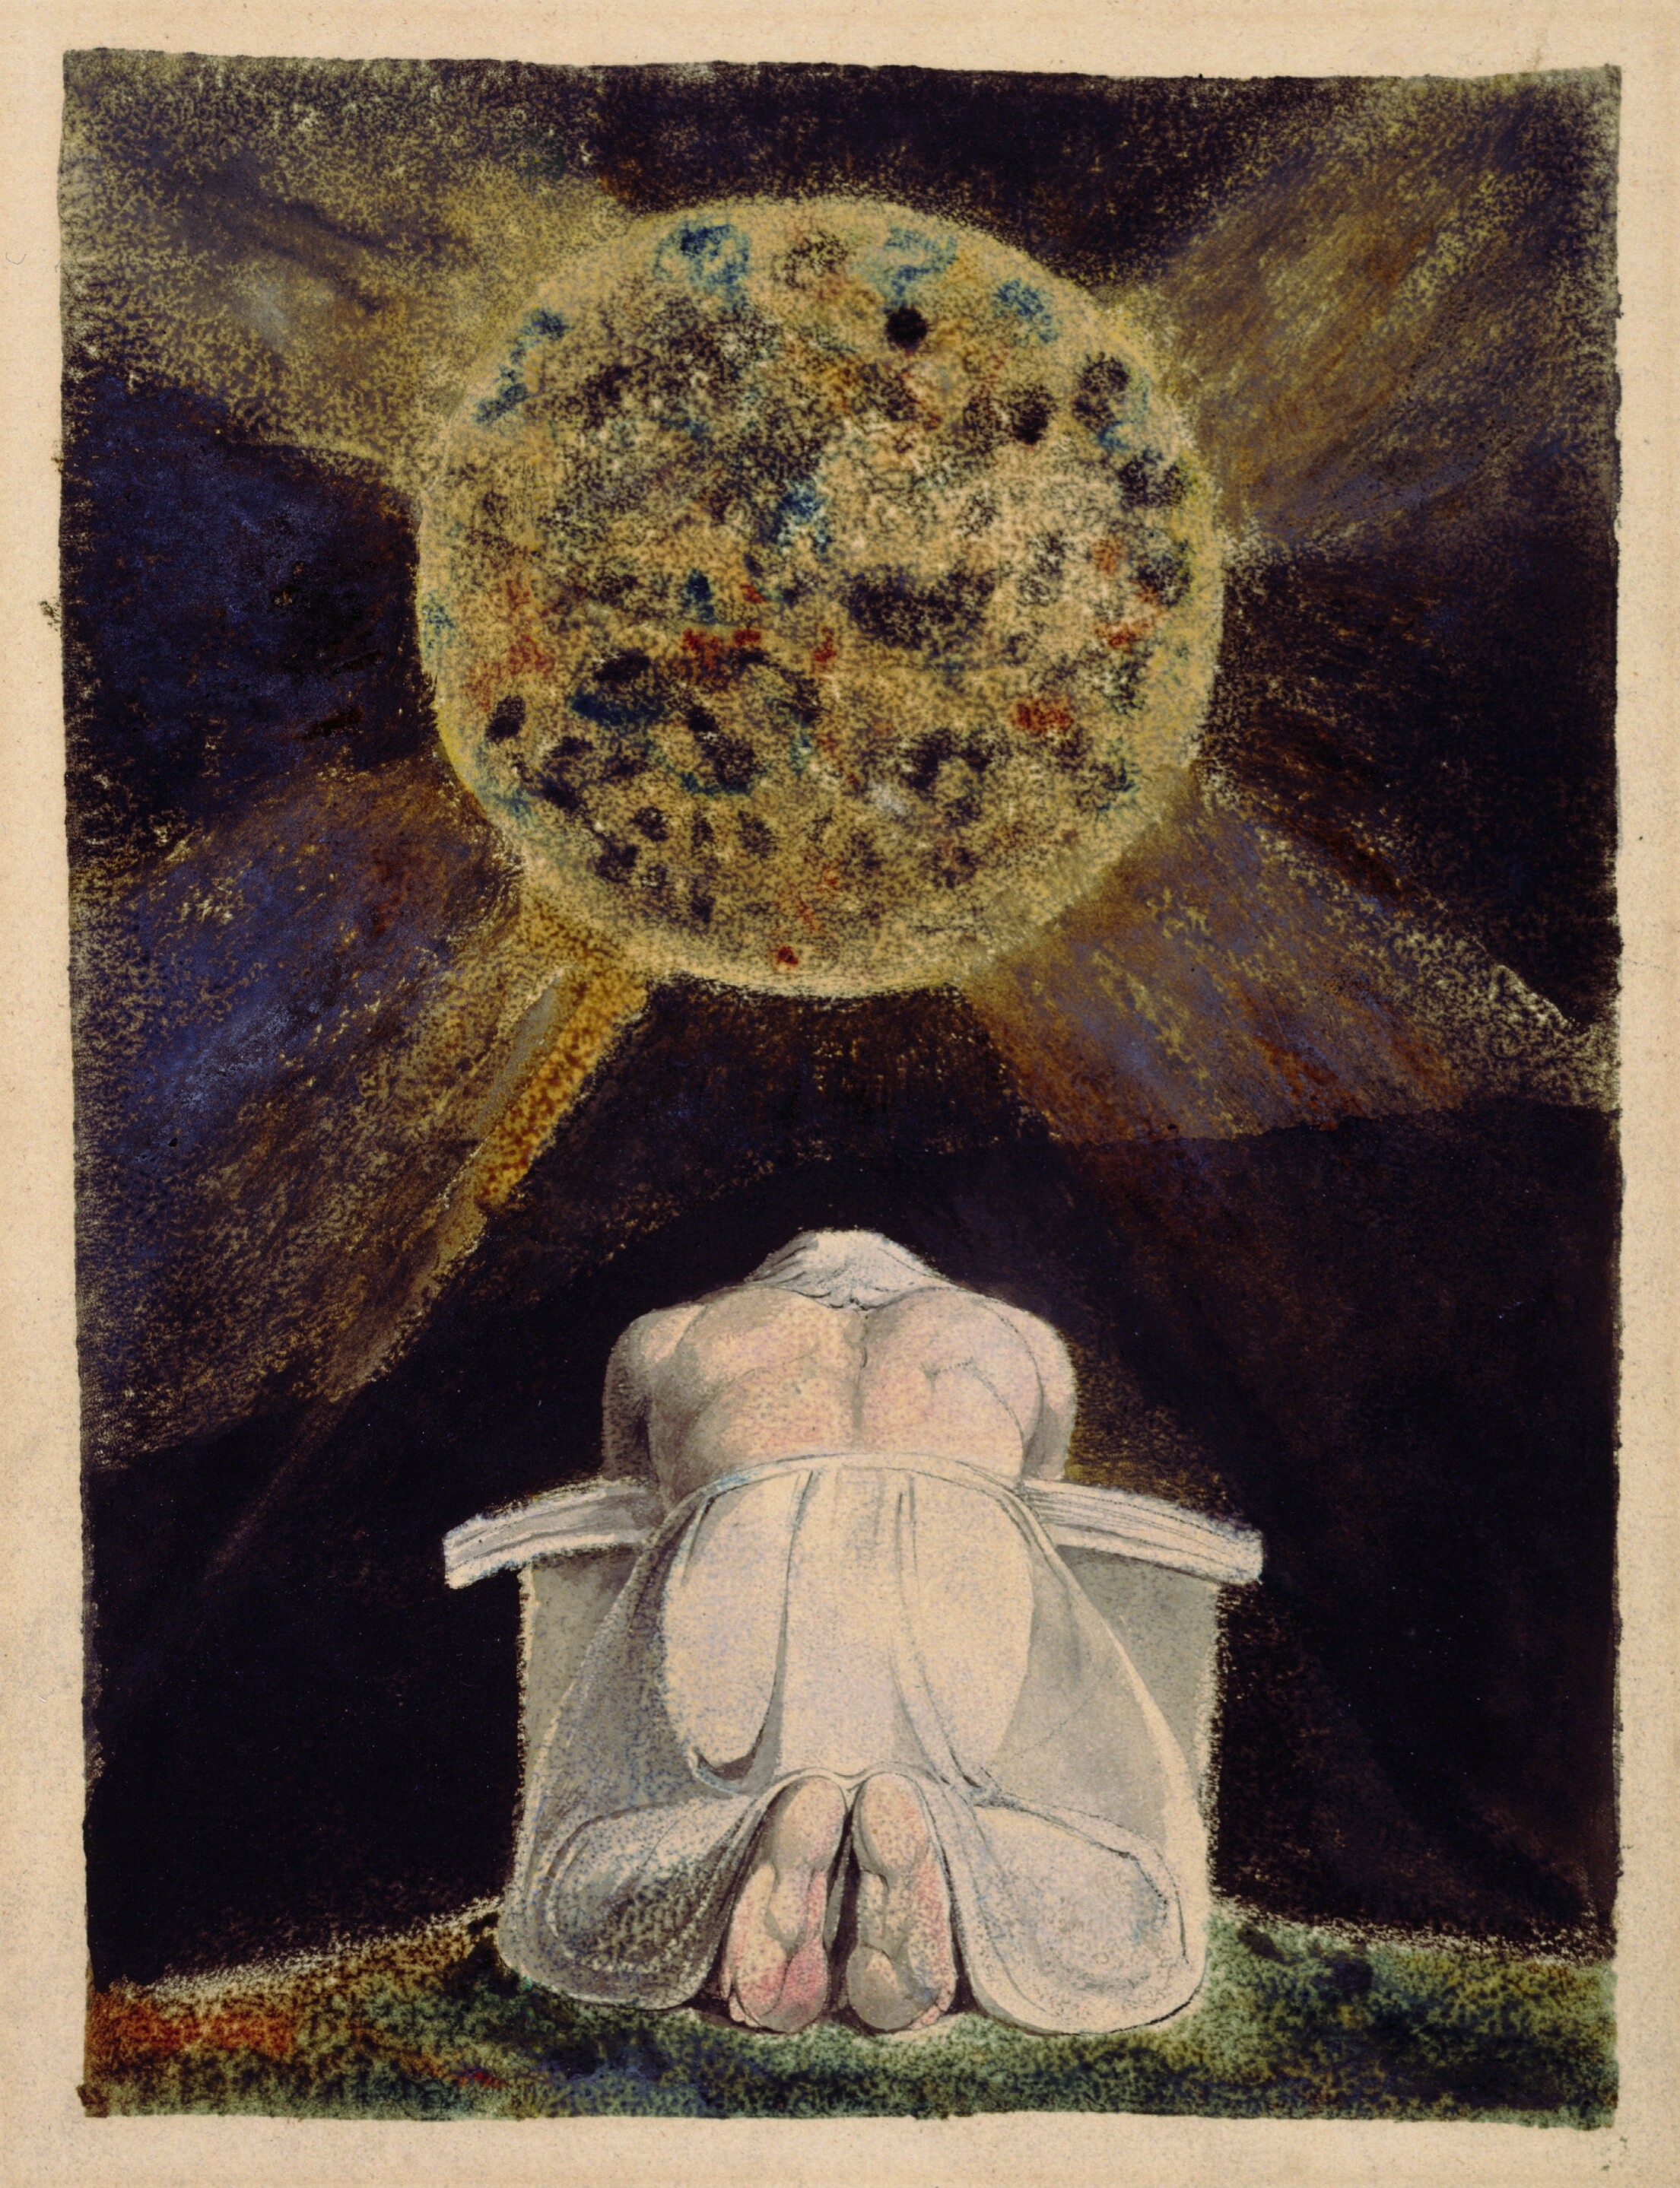 William_Blake_-_Sconfitta_-_Frontispiece_to_The_Song_of_Los.jpg